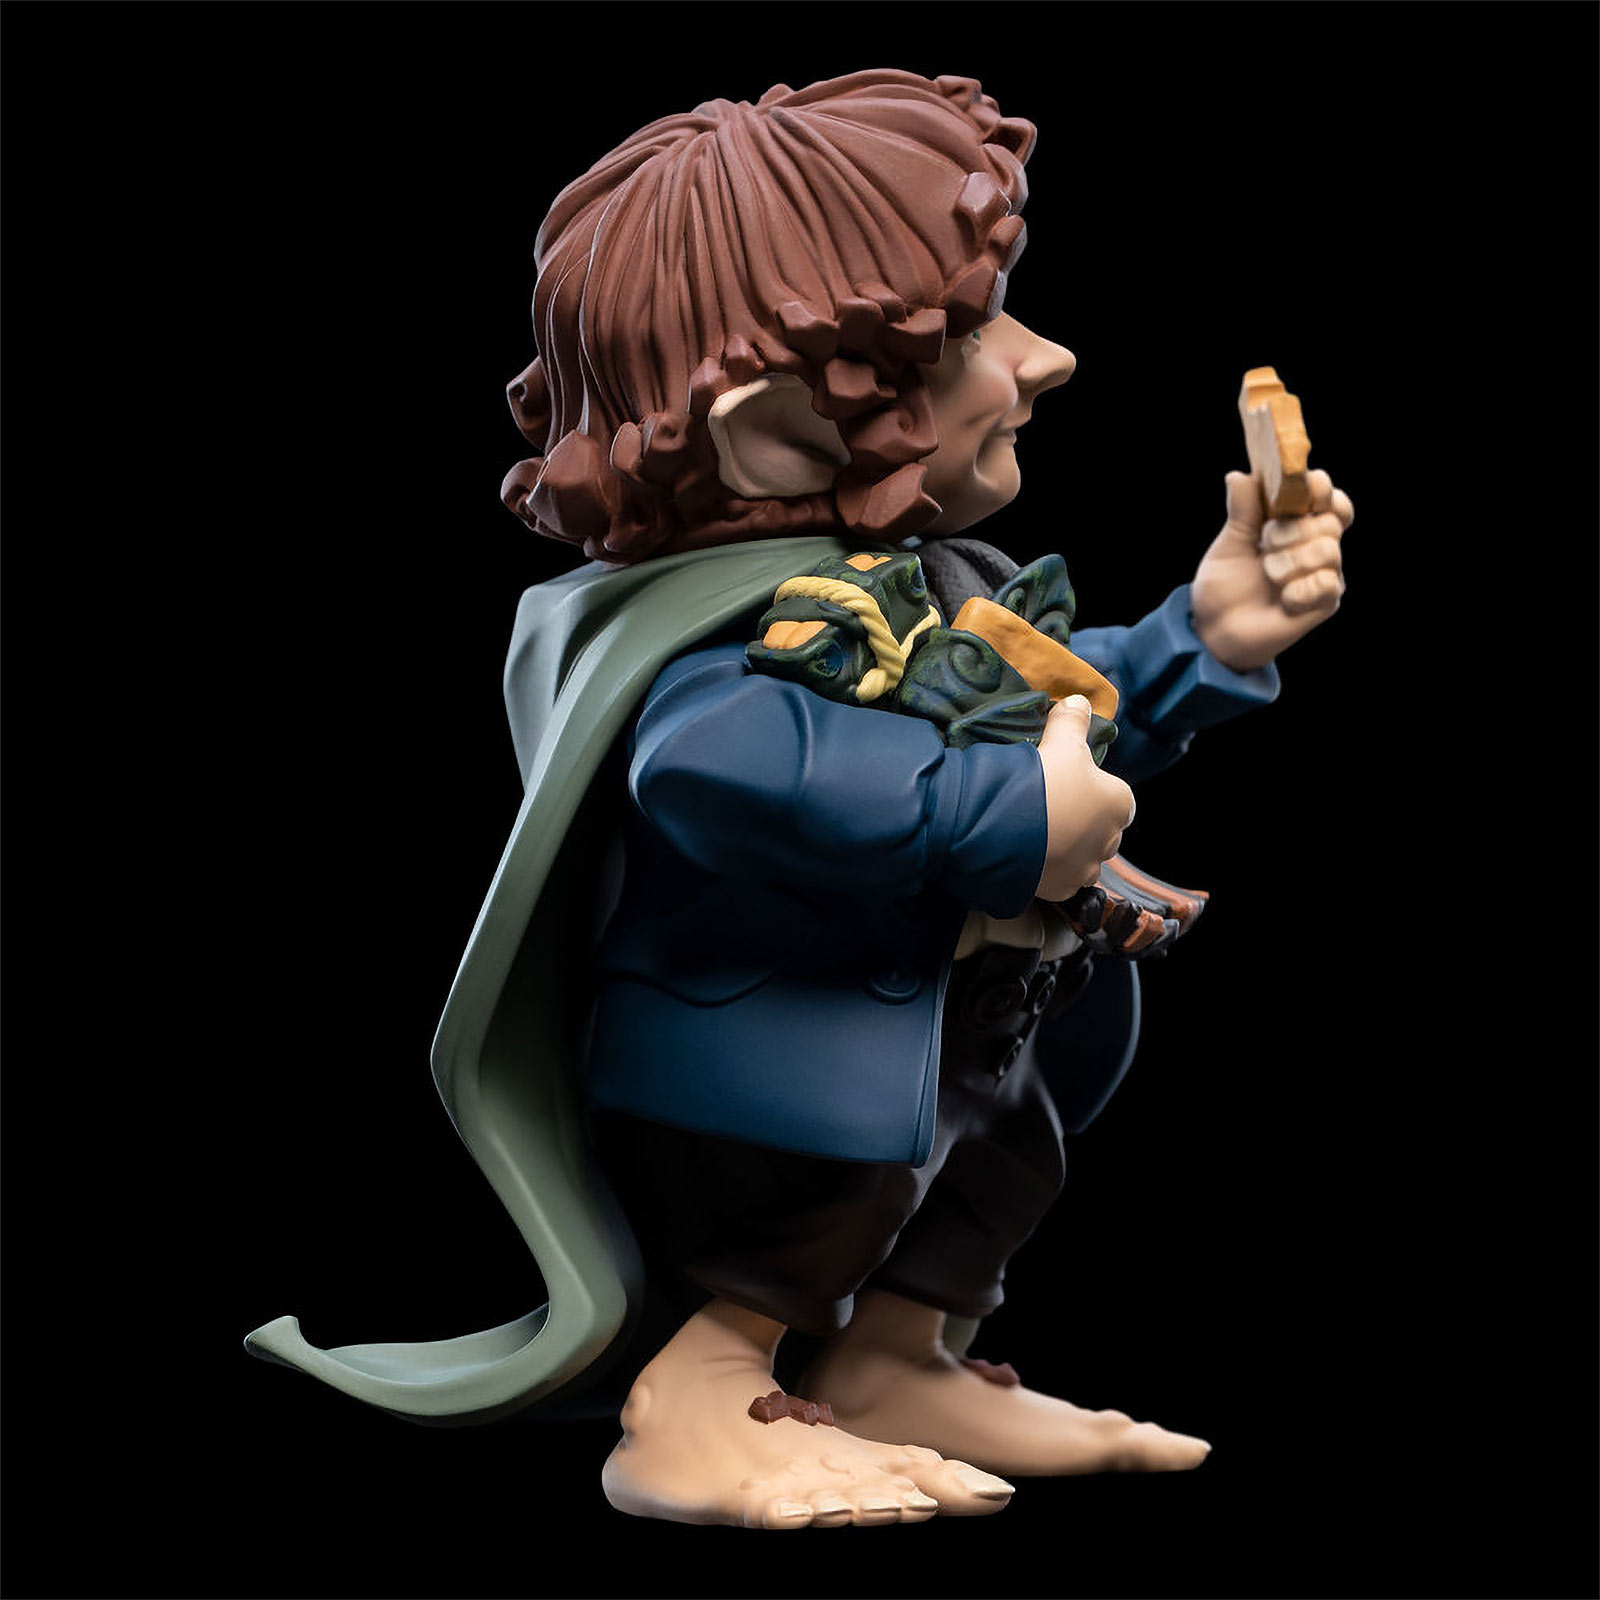 Lord of the Rings - Pippin Mini Epics Figure